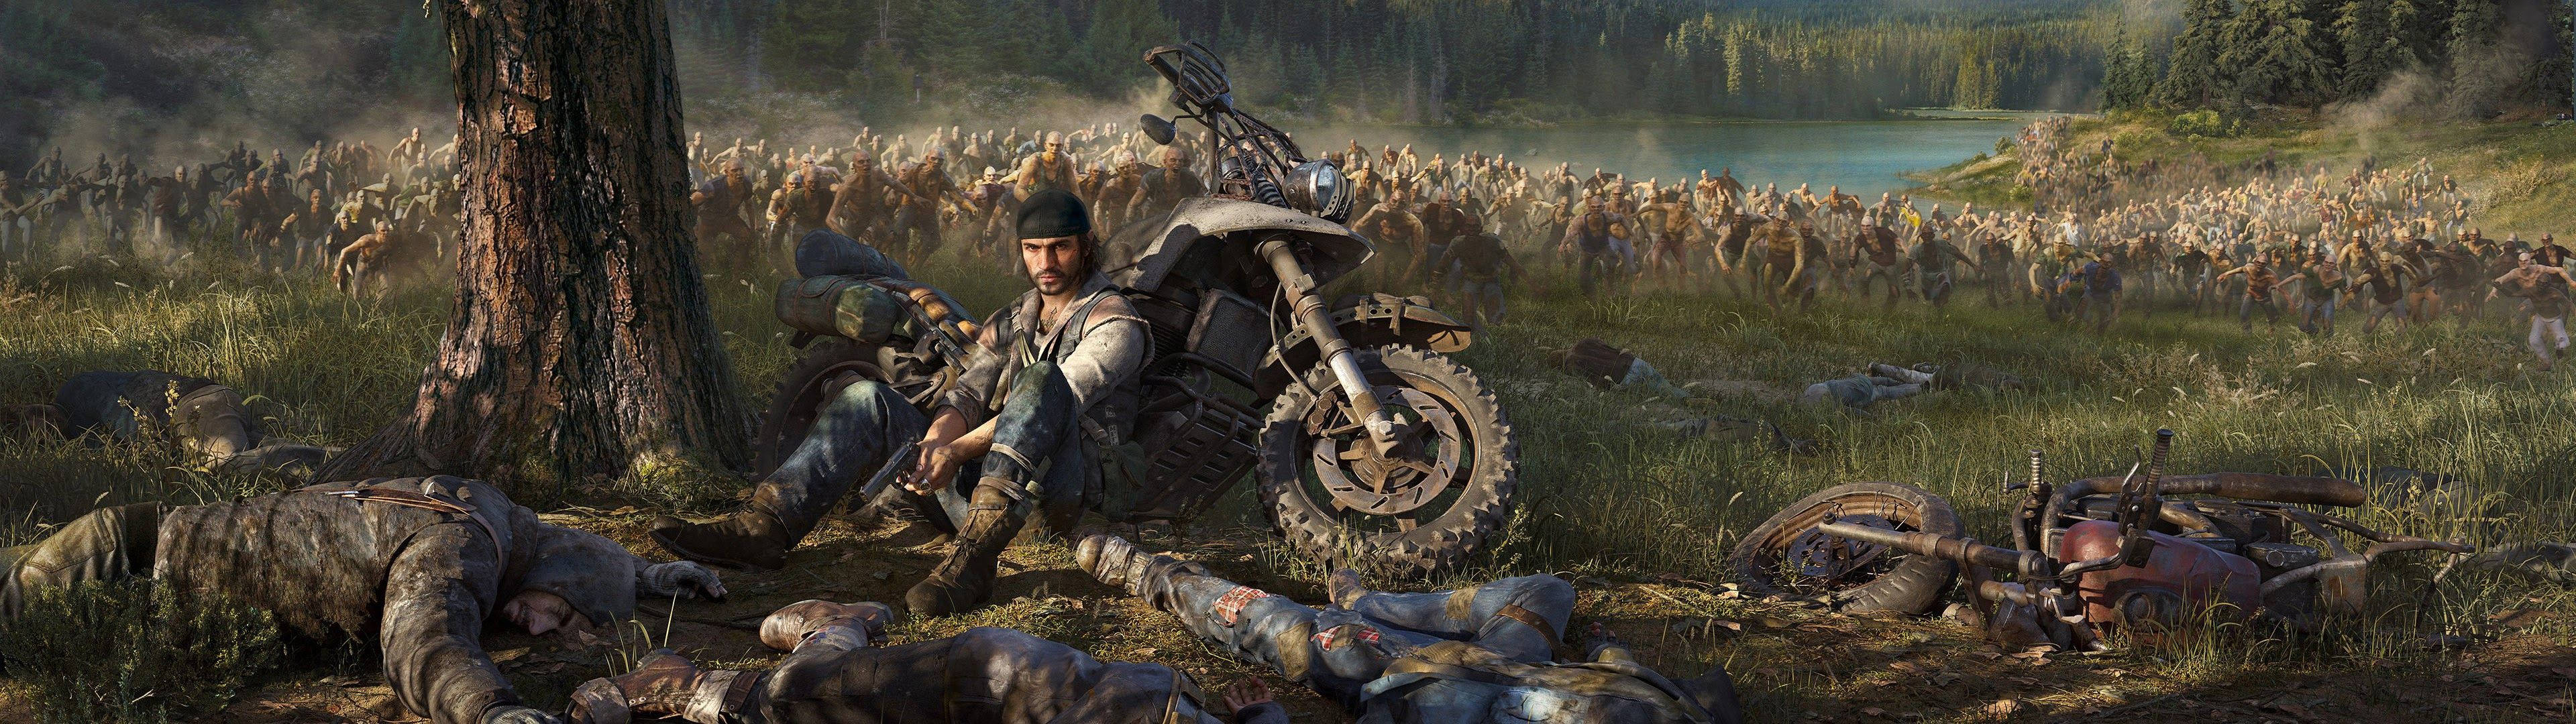 Free Days Gone Wallpaper Downloads, [100+] Days Gone Wallpapers for FREE |  